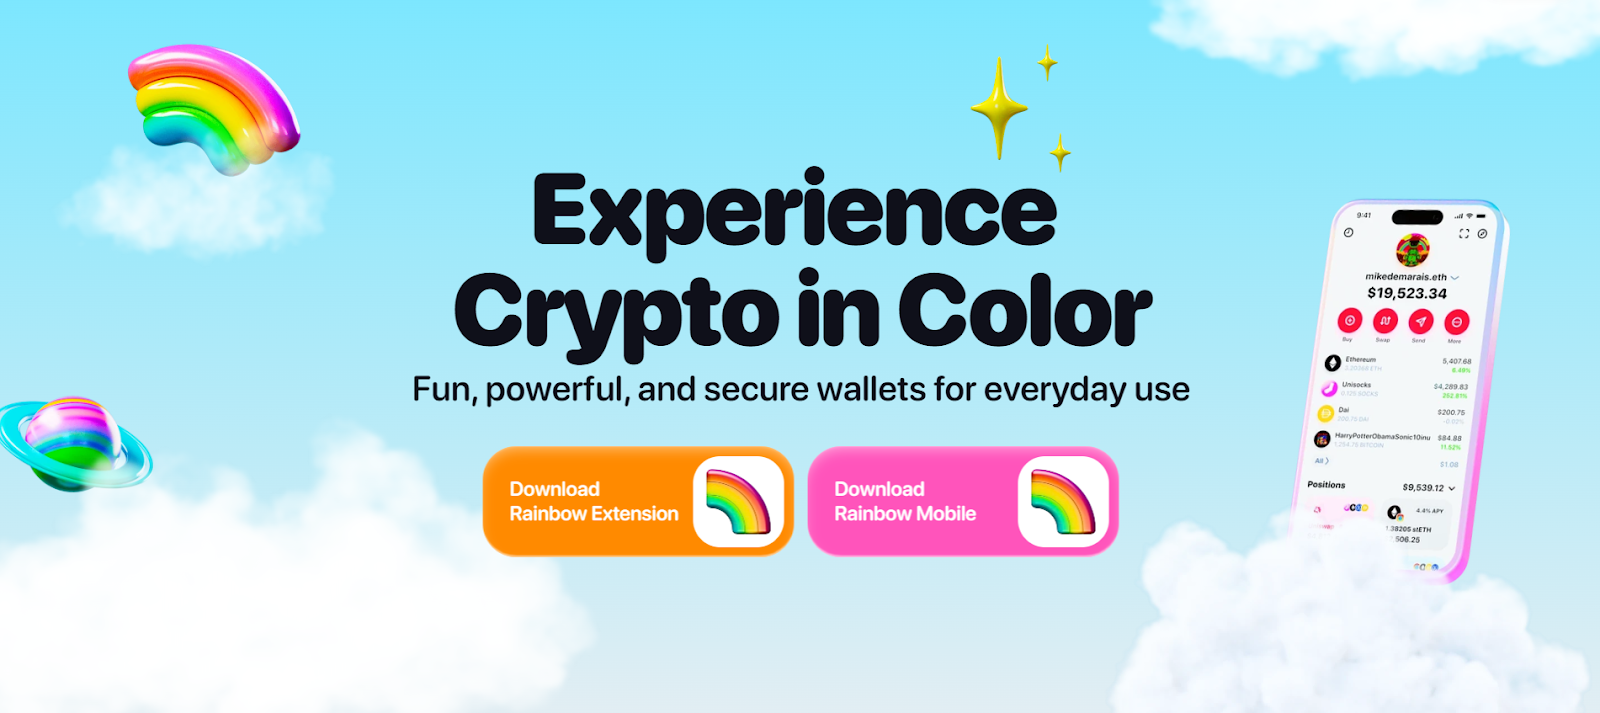 Rainbow Wallet Review  Best Mobile Crypto Wallets